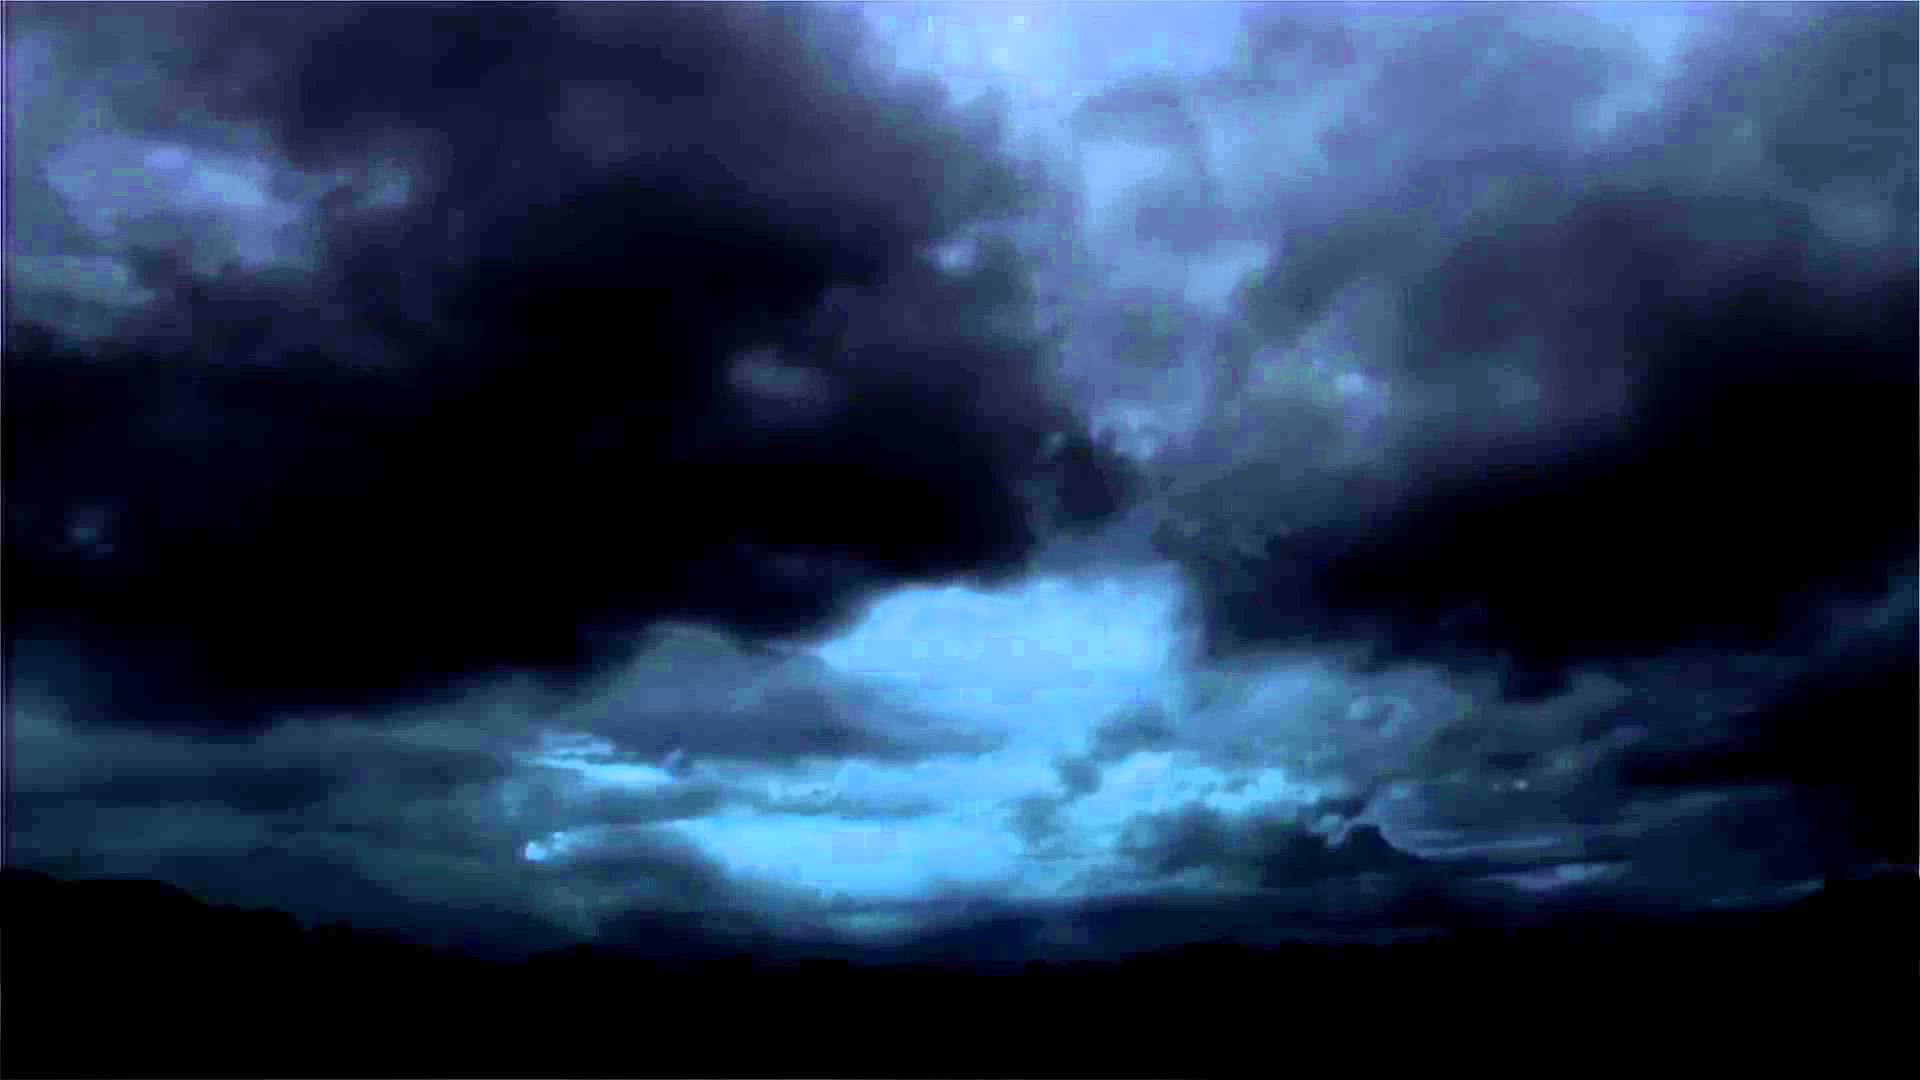 Stormy cloud and lightening compositing in after effects - YouTube